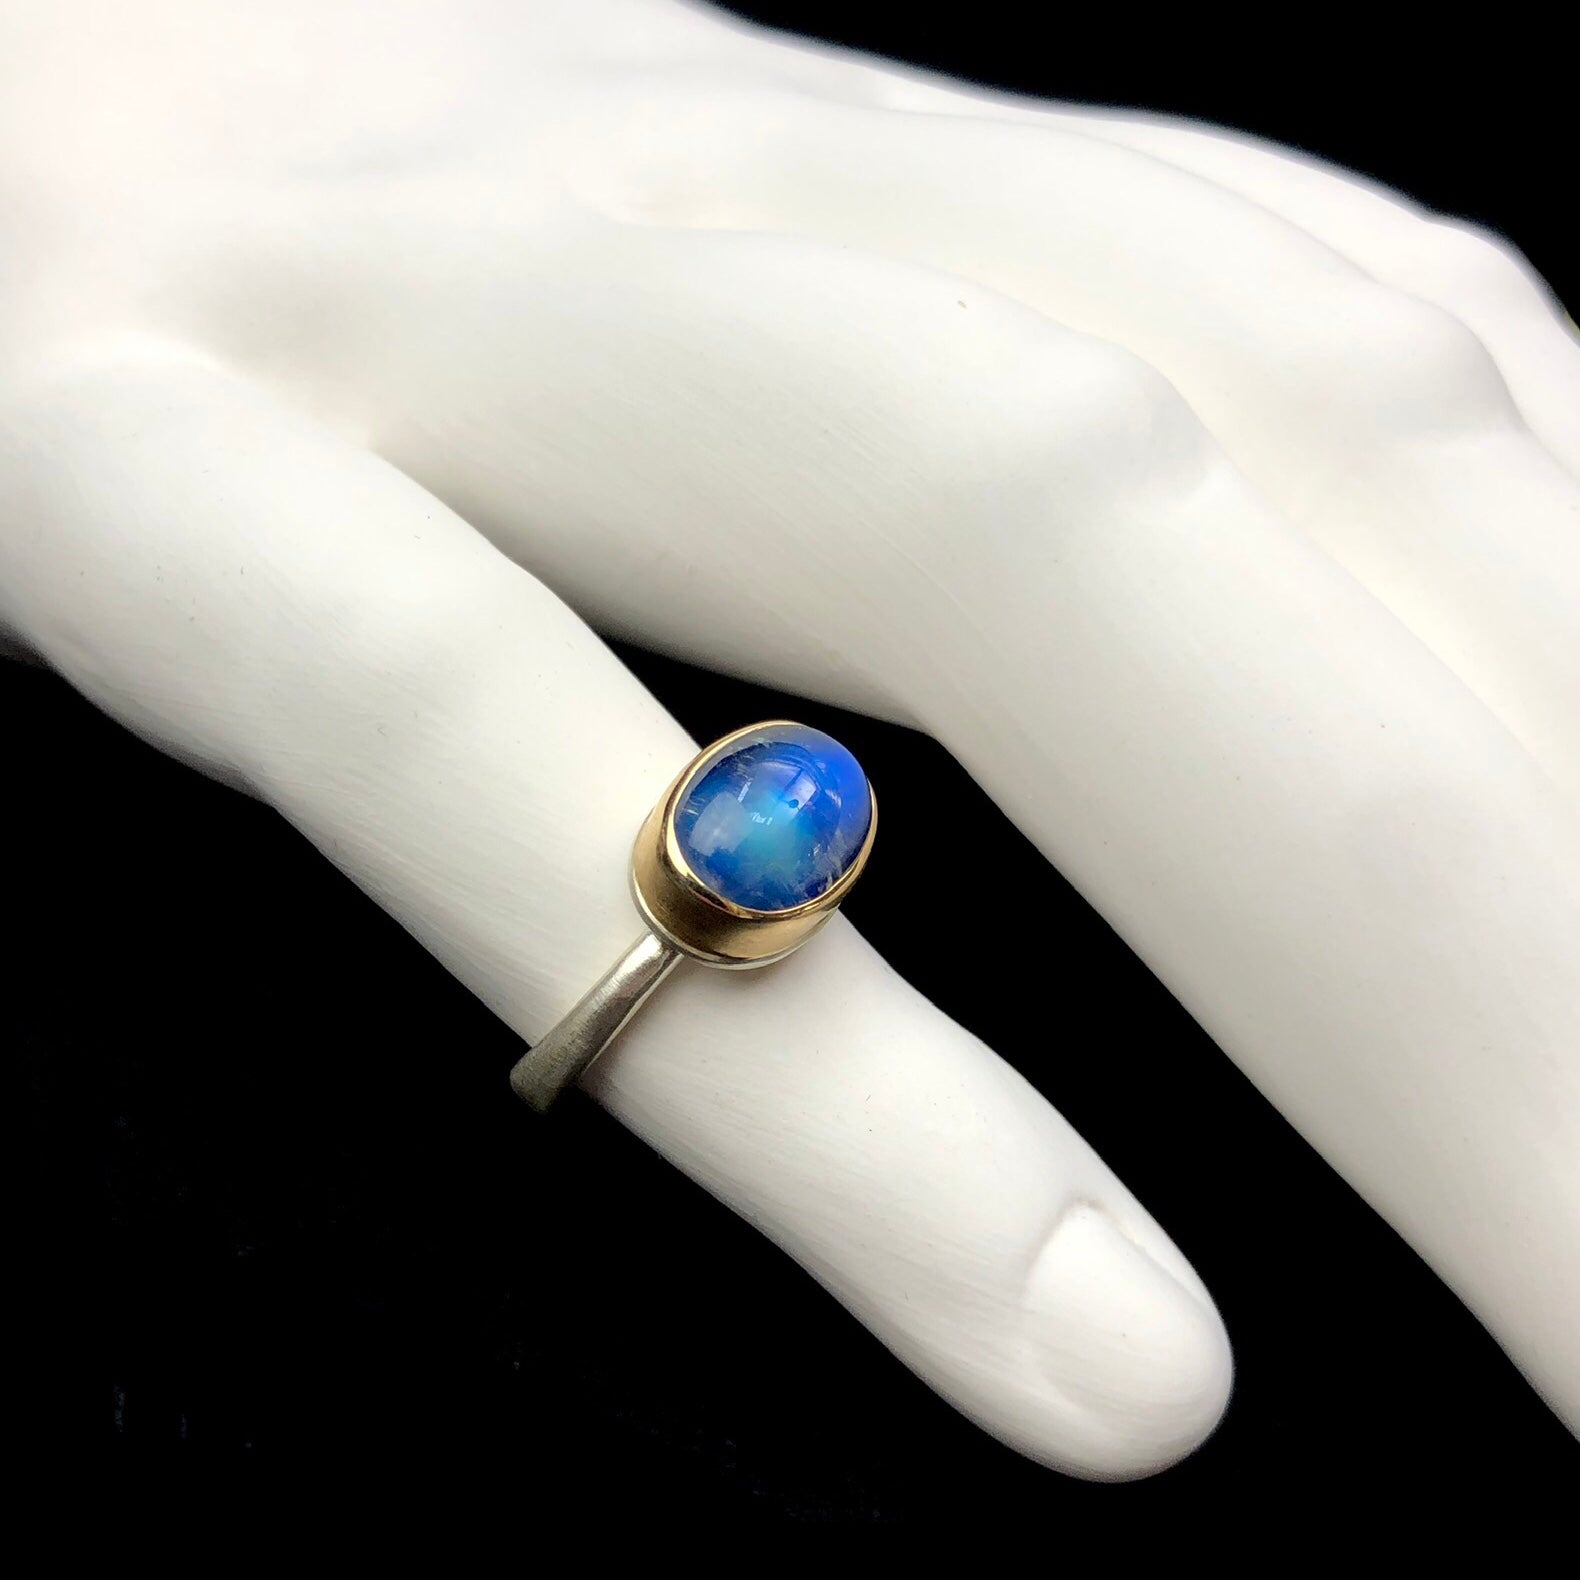 Profile view of smoothly polished blue stone with gold setting and white band shown on white ceramic finger